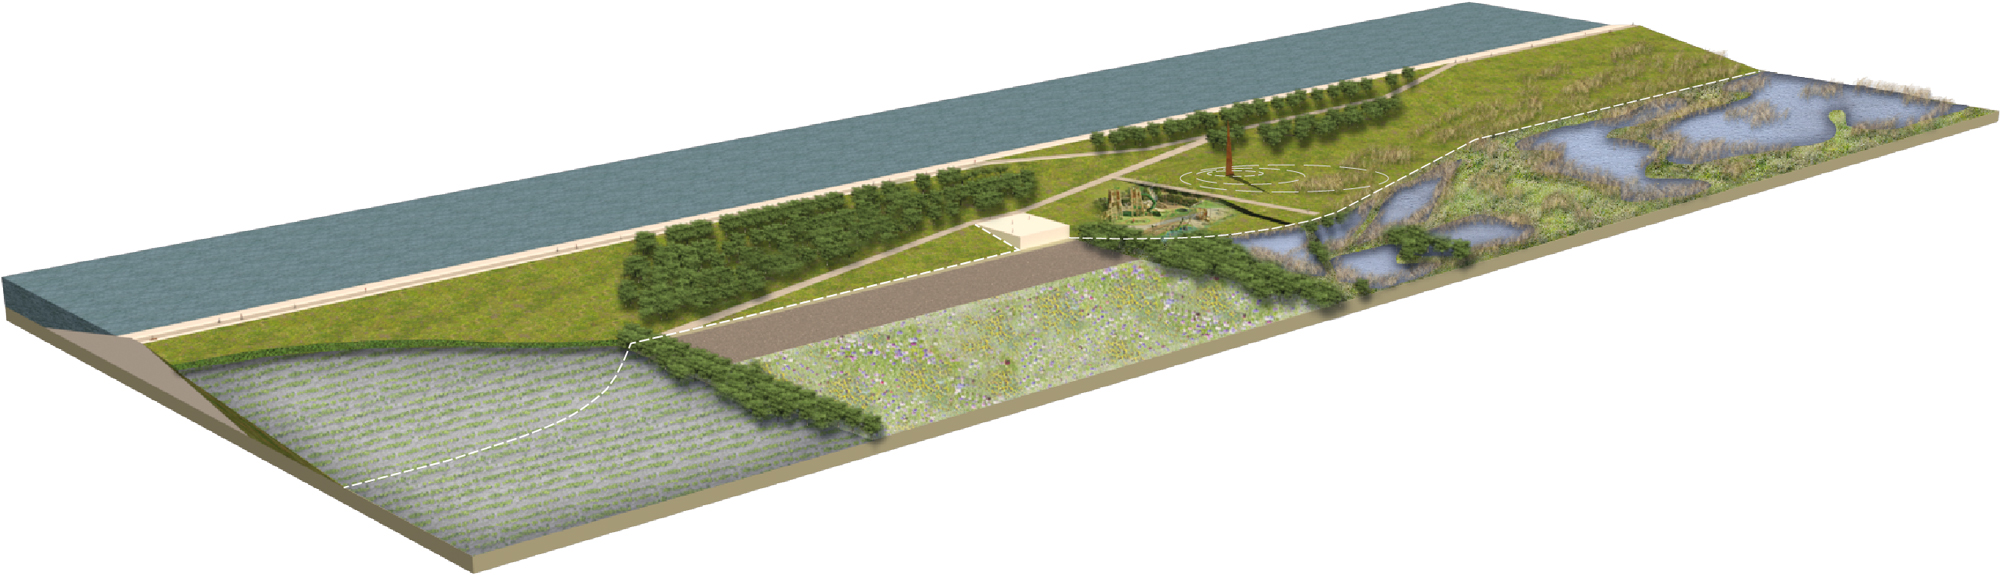 What positive embankment integration could include. Illustration showing a range of ways in which the embankment could be integrated into its surroundings